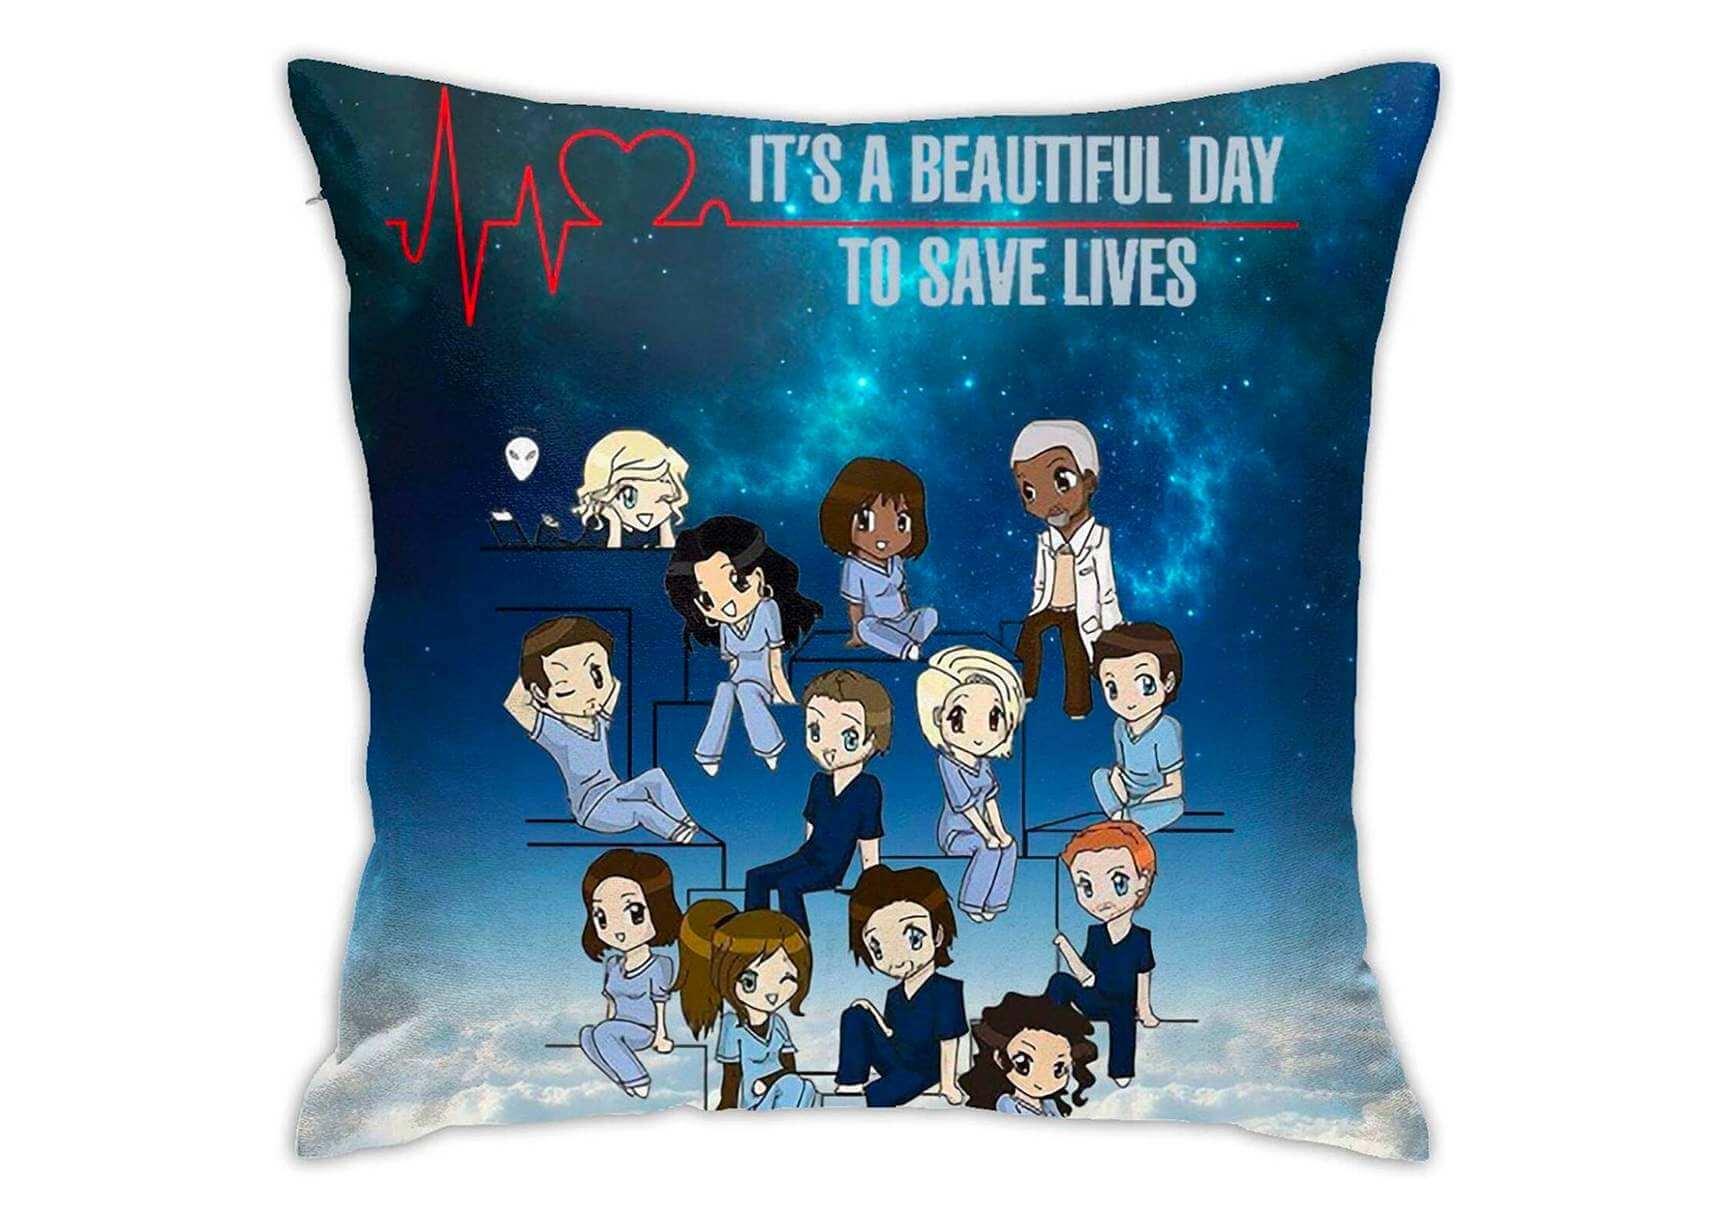 A throw pilllow with anime drawings of health professionals and the text "It's a beautiful day to safe lives".